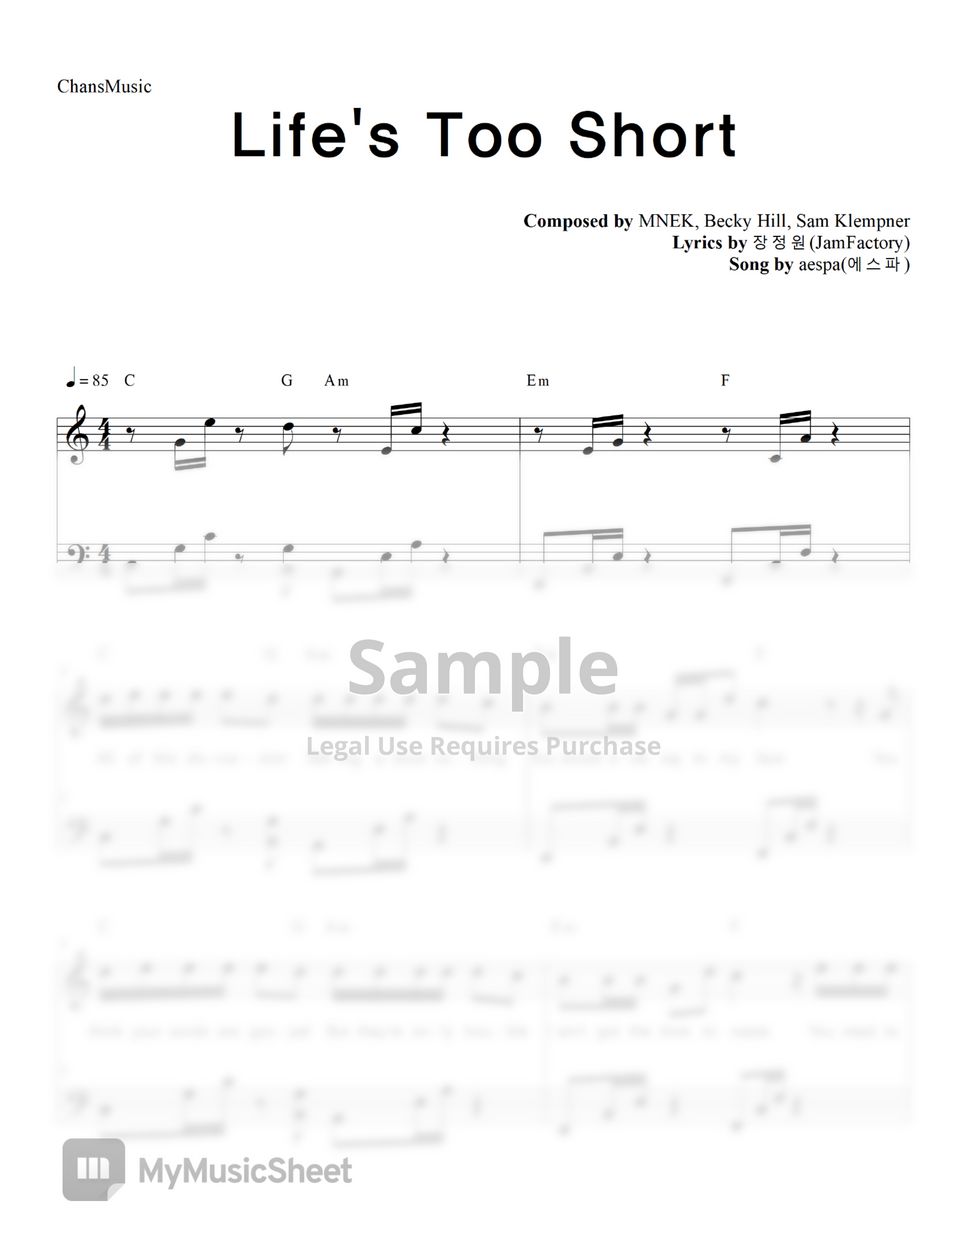 aespa - Life's Too Short (Easy Version) by ChansMusic